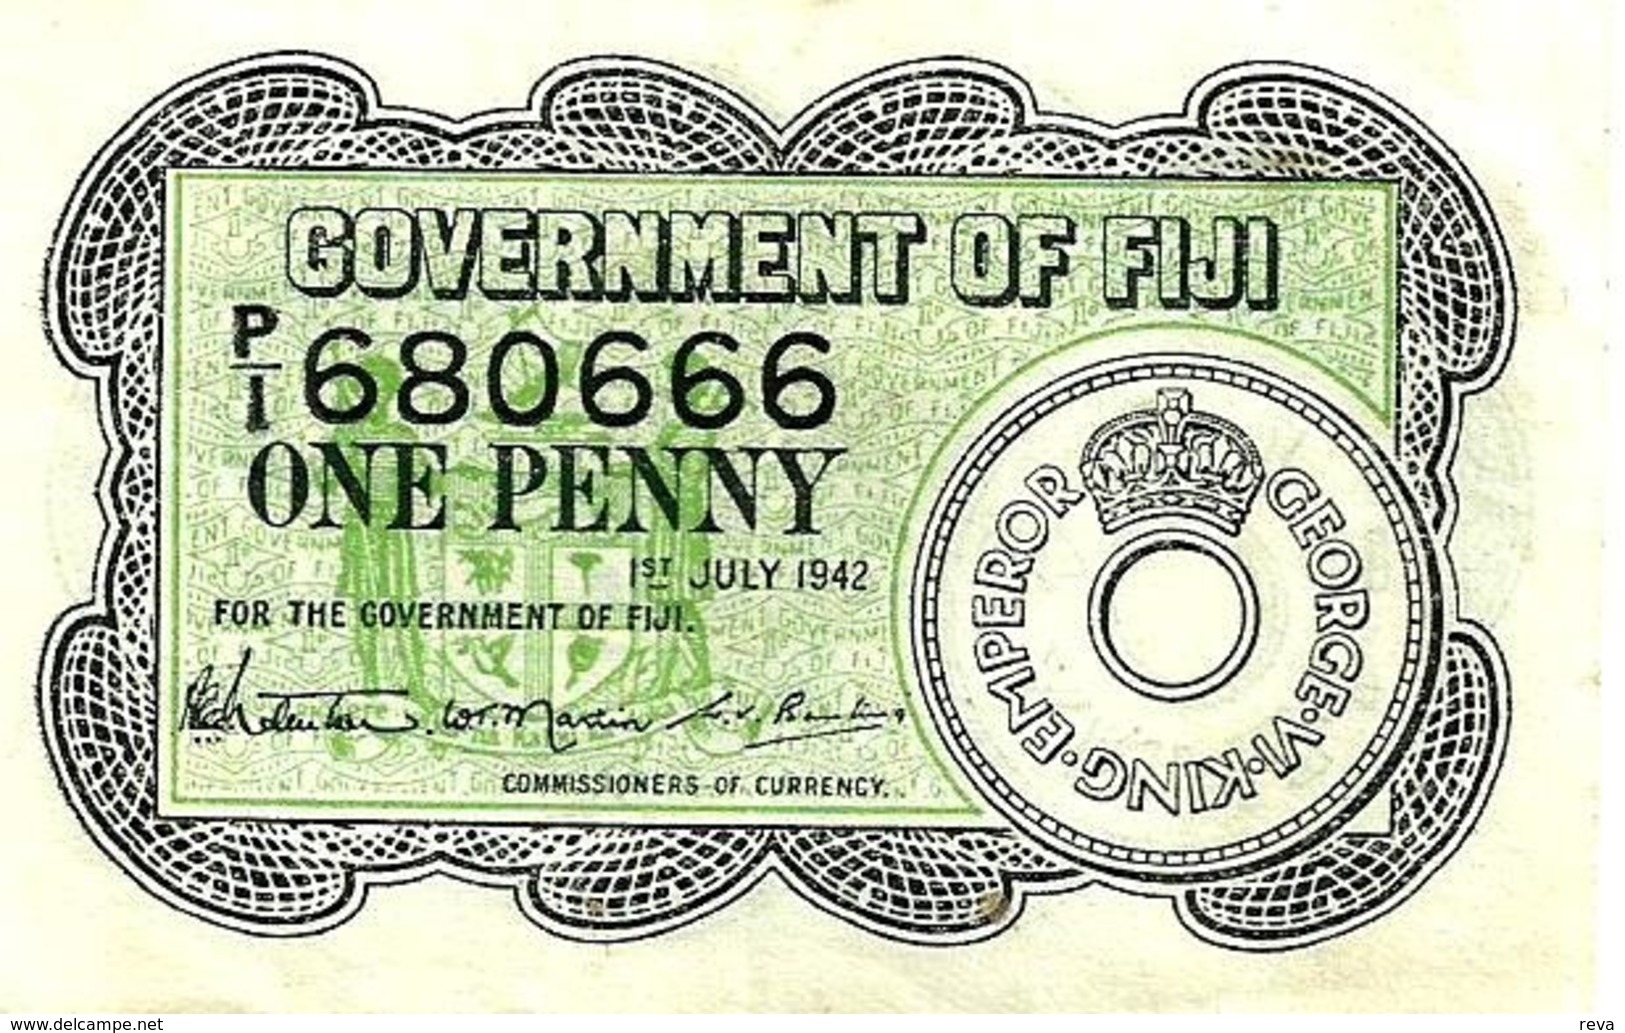 FIJI 1 PENNY GREEN COIN WITH KGVI NAME FRONT MOTIF COIN BACK DATED 01-07-1942 UNC P.39a READ DESCRIPTION!! - Fiji